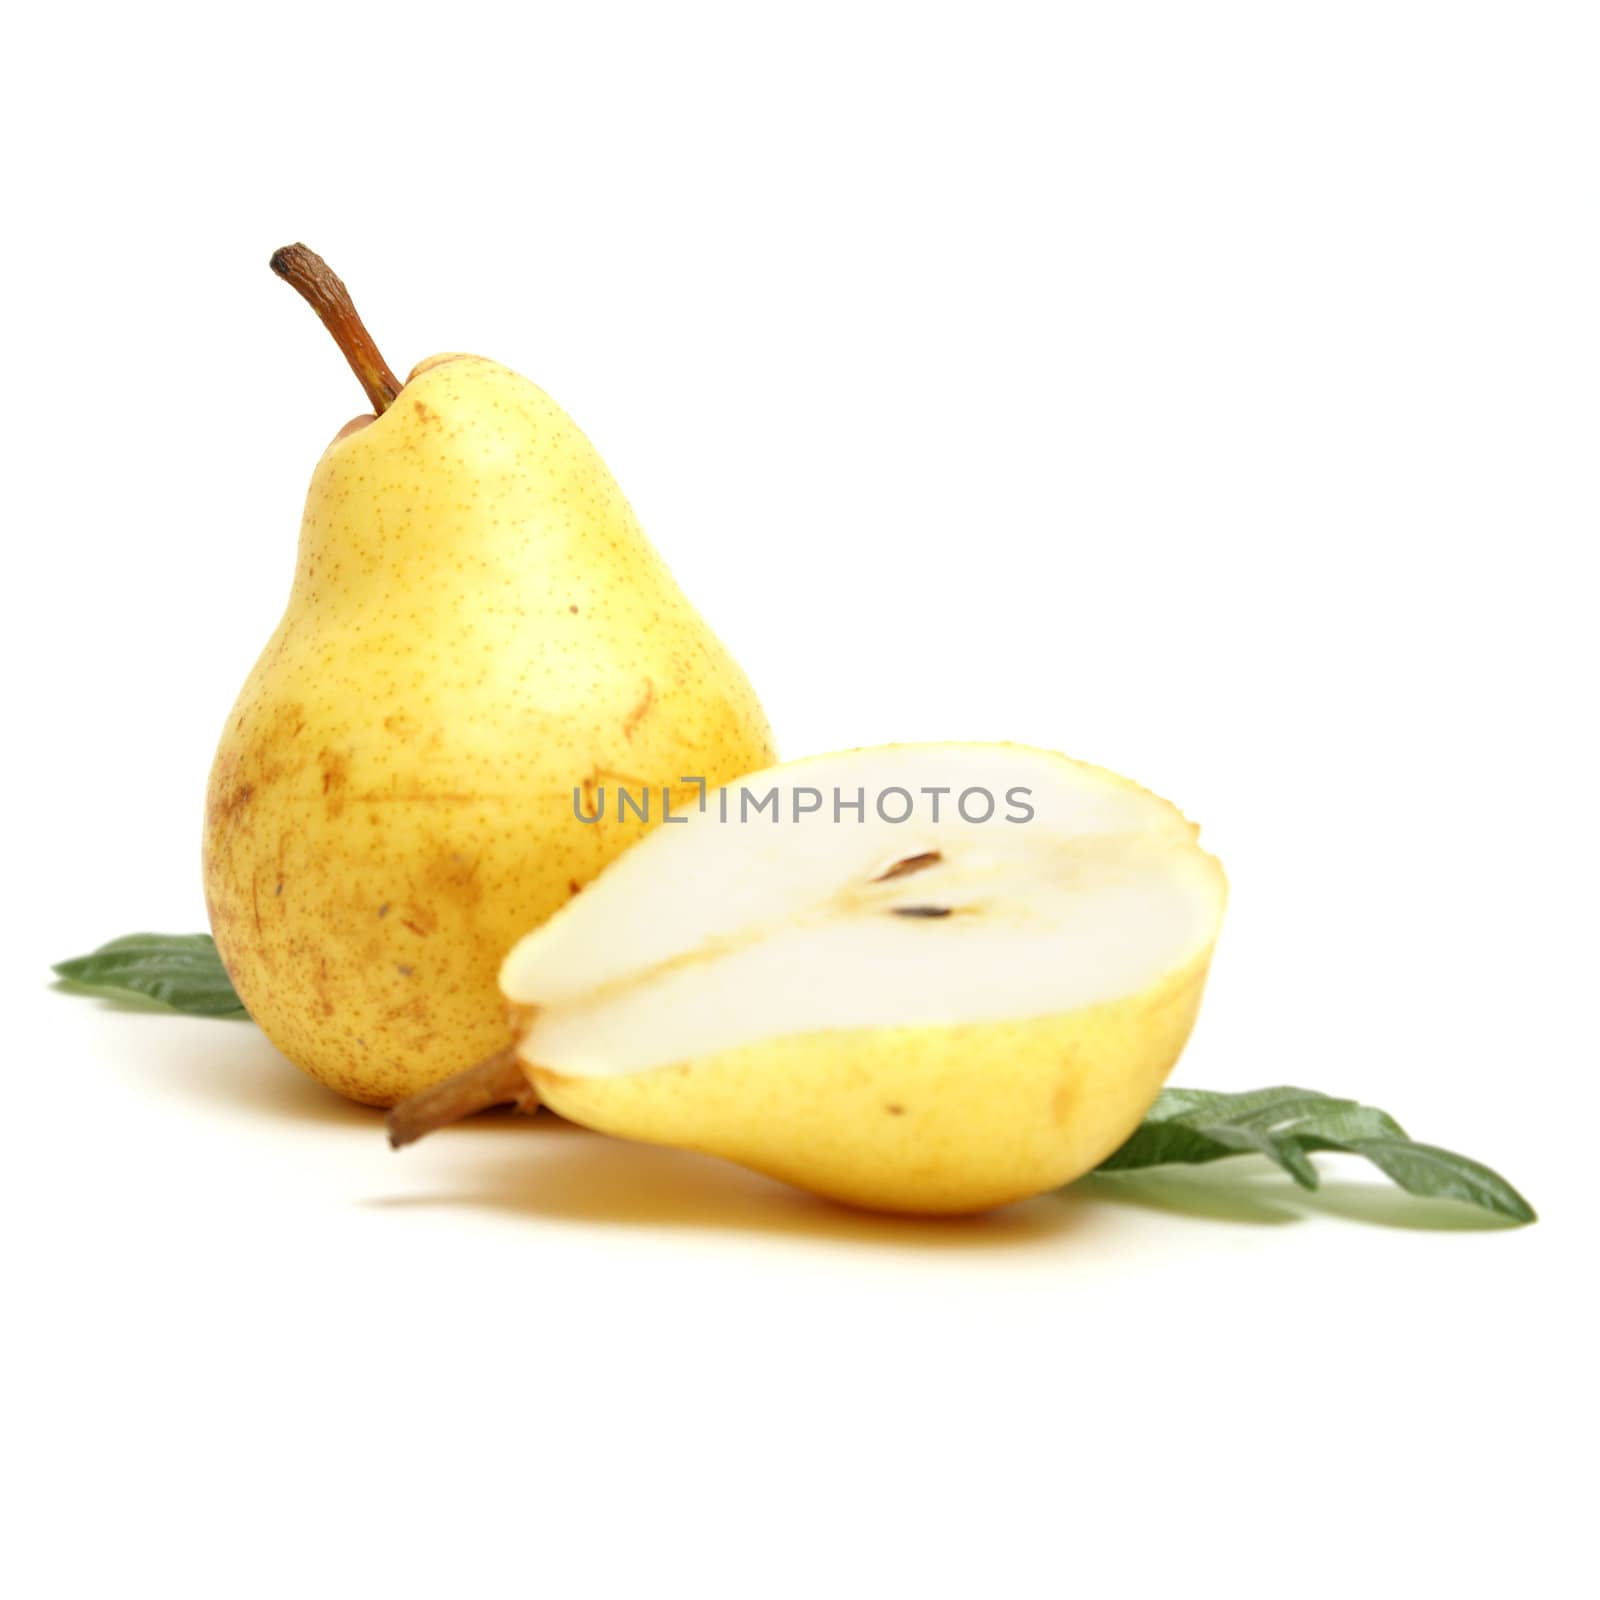 A couple of isolated pears with one that is cut in half.